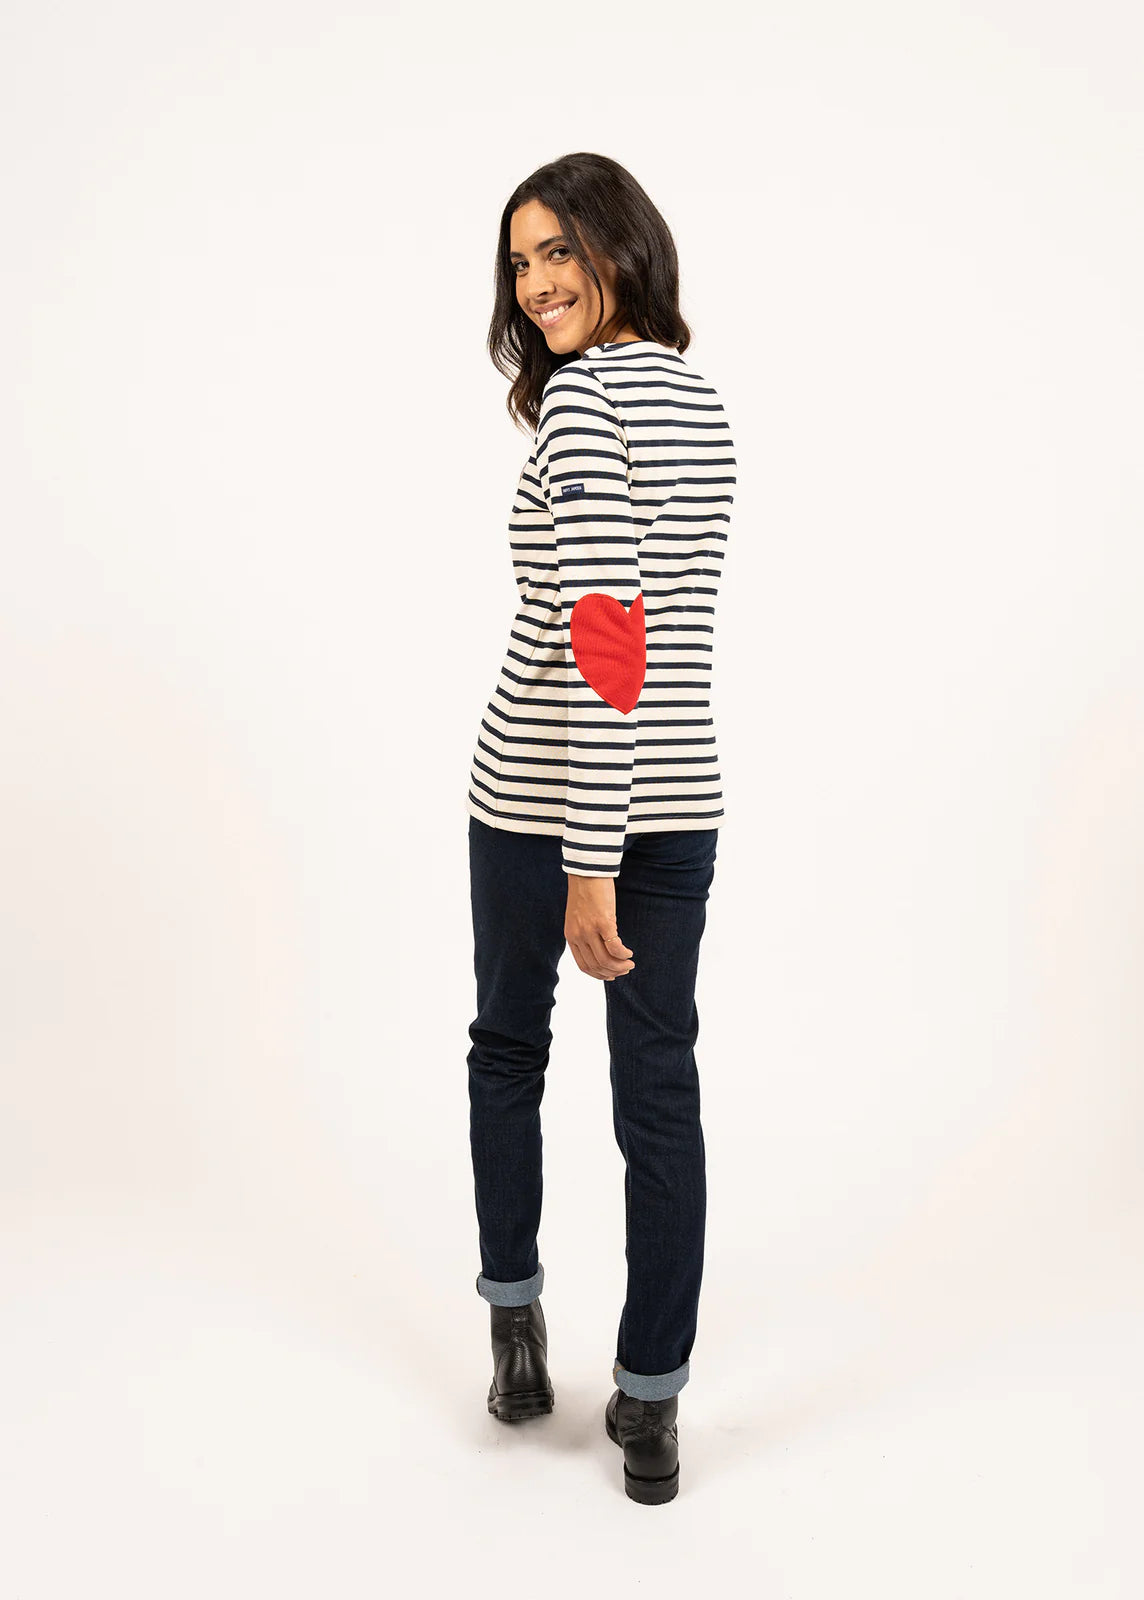 Vaujany Striped Tee Shirt in Navy with Red